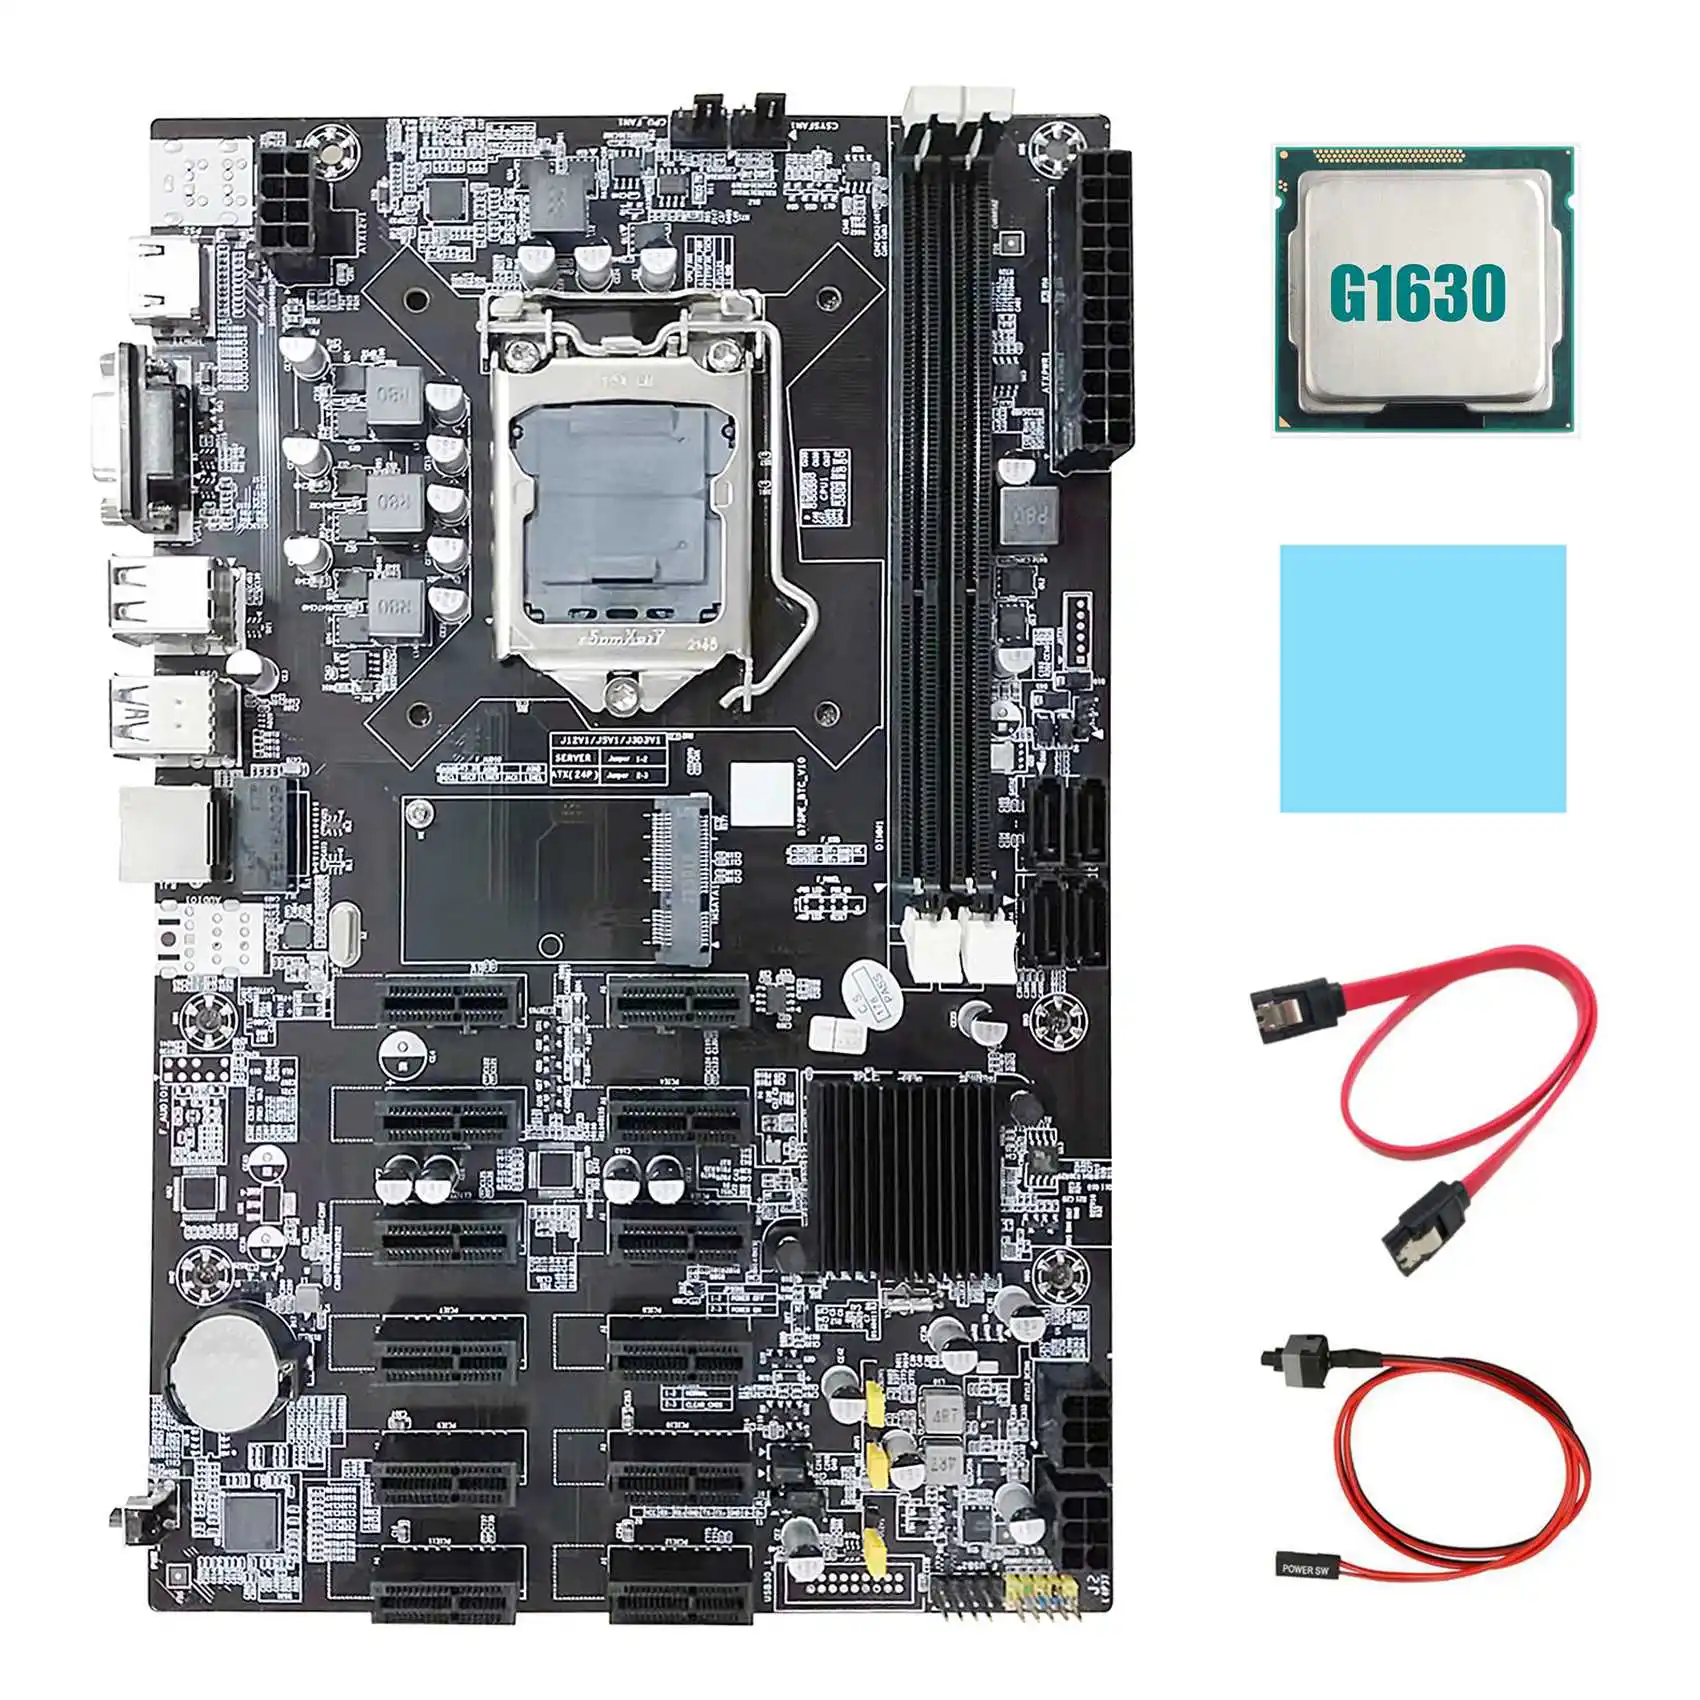 

B75 ETH Mining Motherboard 12 PCIE+G1630 CPU+SATA Cable+Switch Cable+Thermal Pad LGA1155 B75 BTC Miner Motherboard